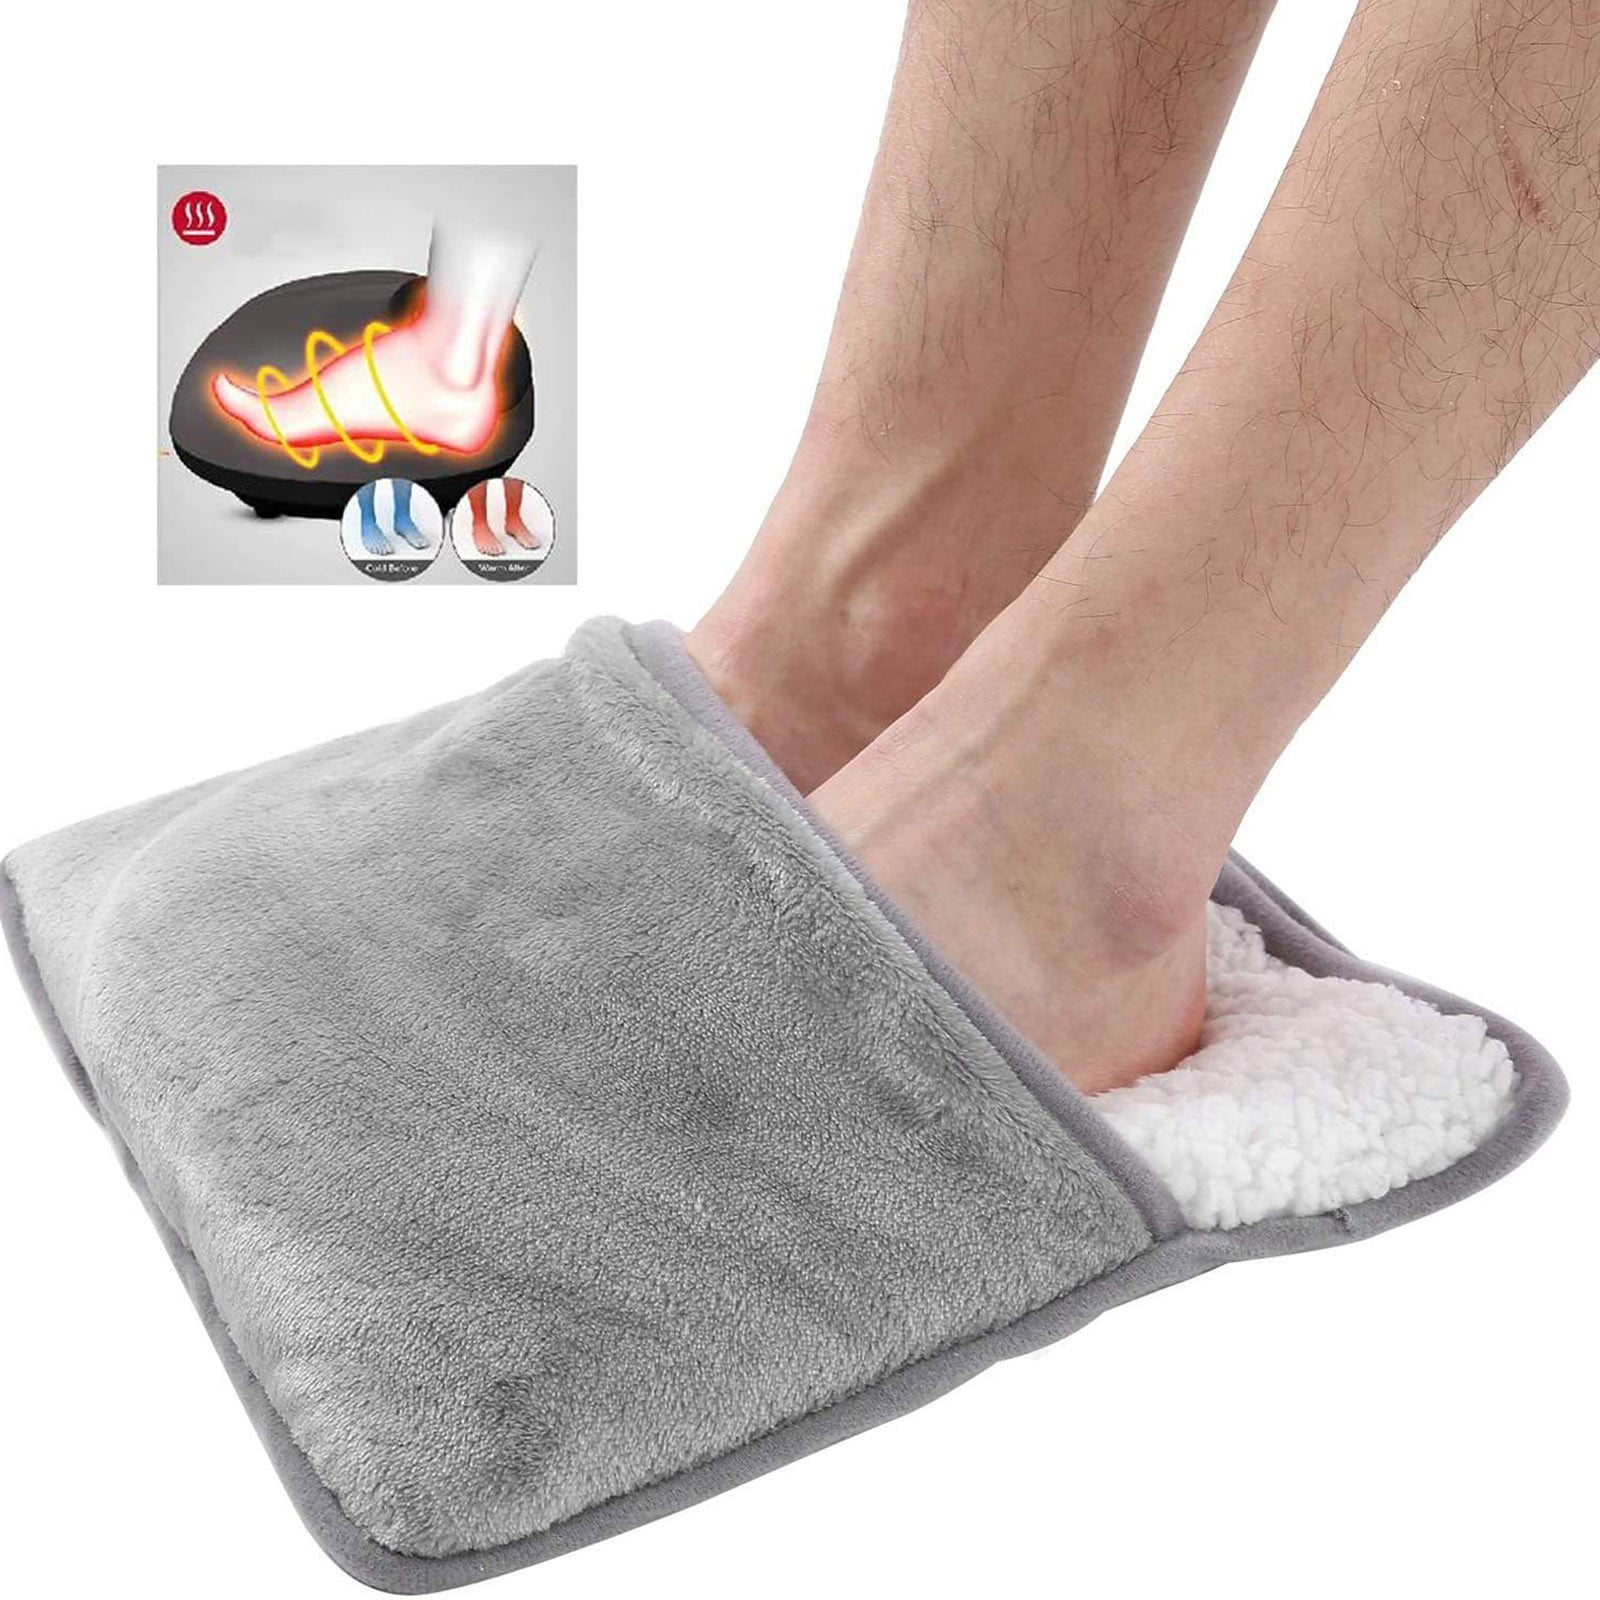 Split Electric Foot Warmer,Quick Heating Pad for Feet，Universal Size Heated  Slippers for Men Women,Soft Heated Boots,Feet Warmer with Removable